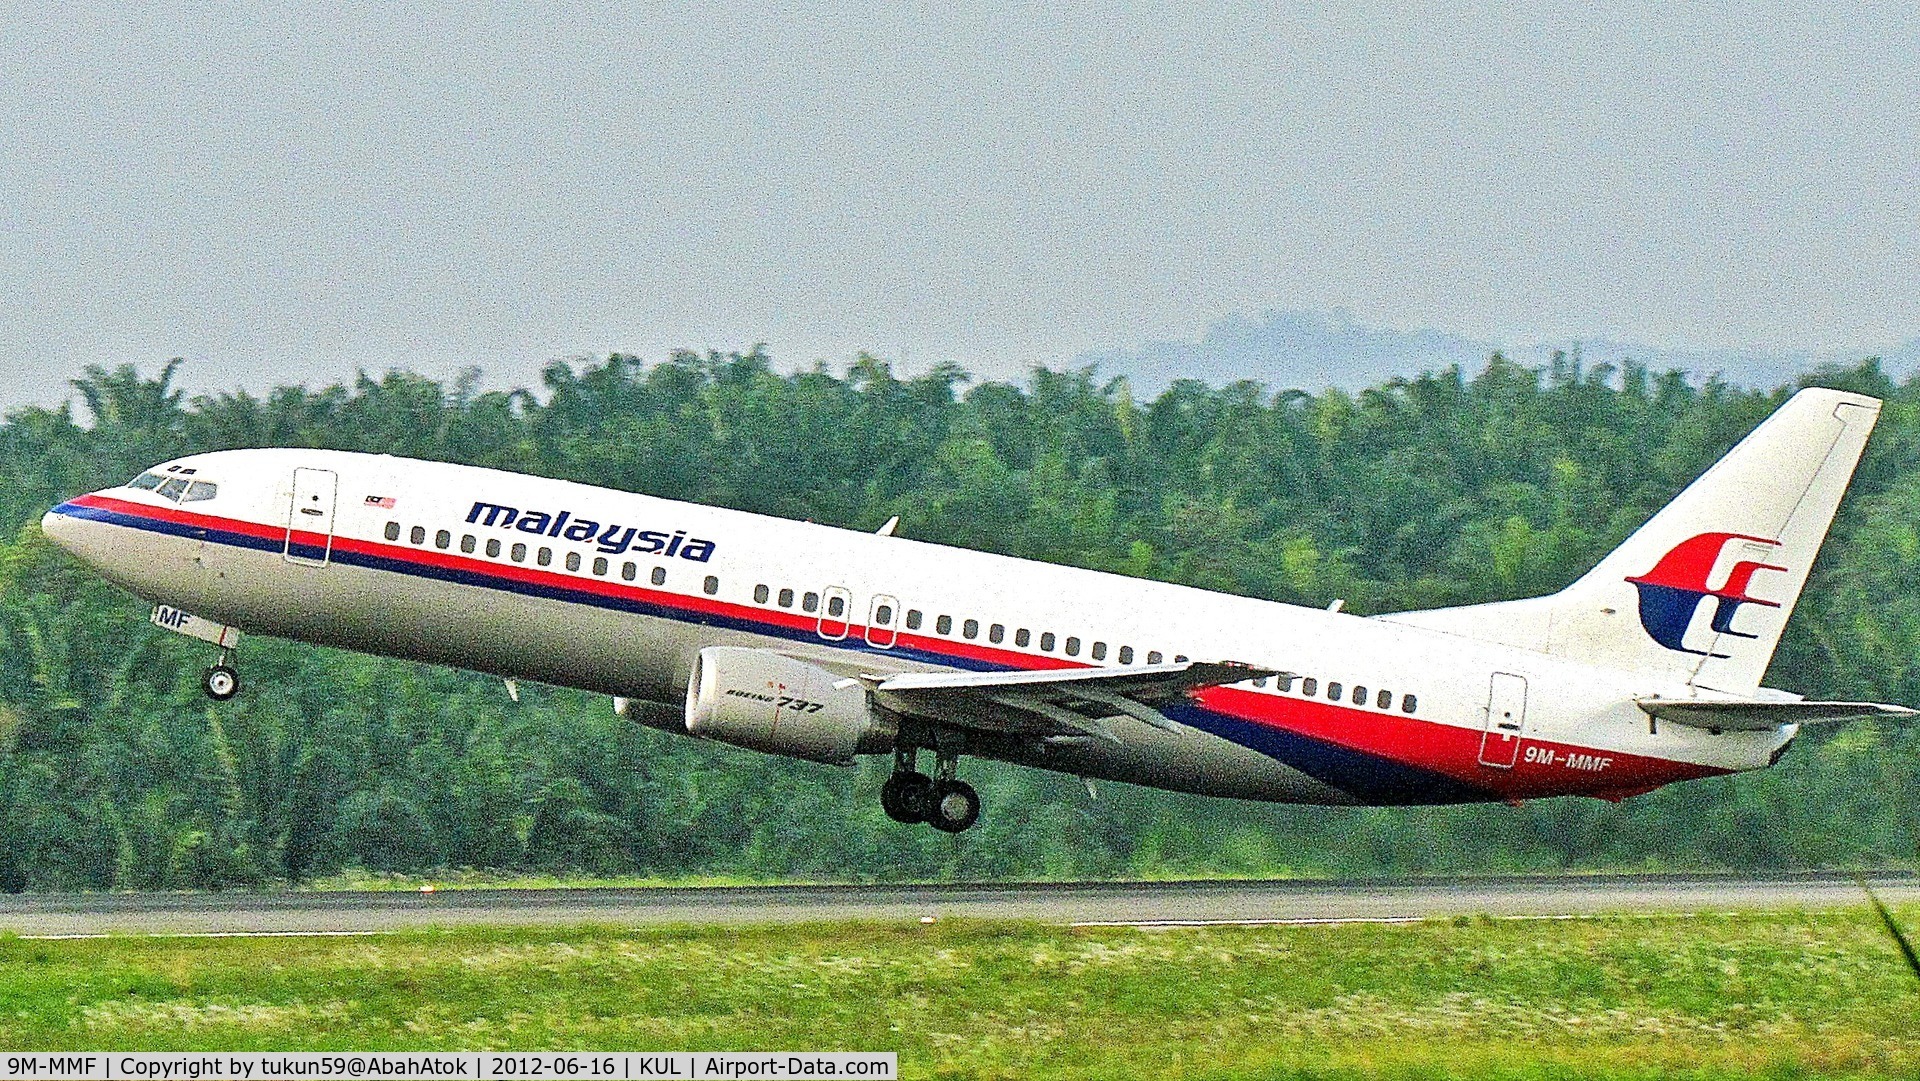 9M-MMF, 1992 Boeing 737-4H6 C/N 26466, Malaysia Airlines